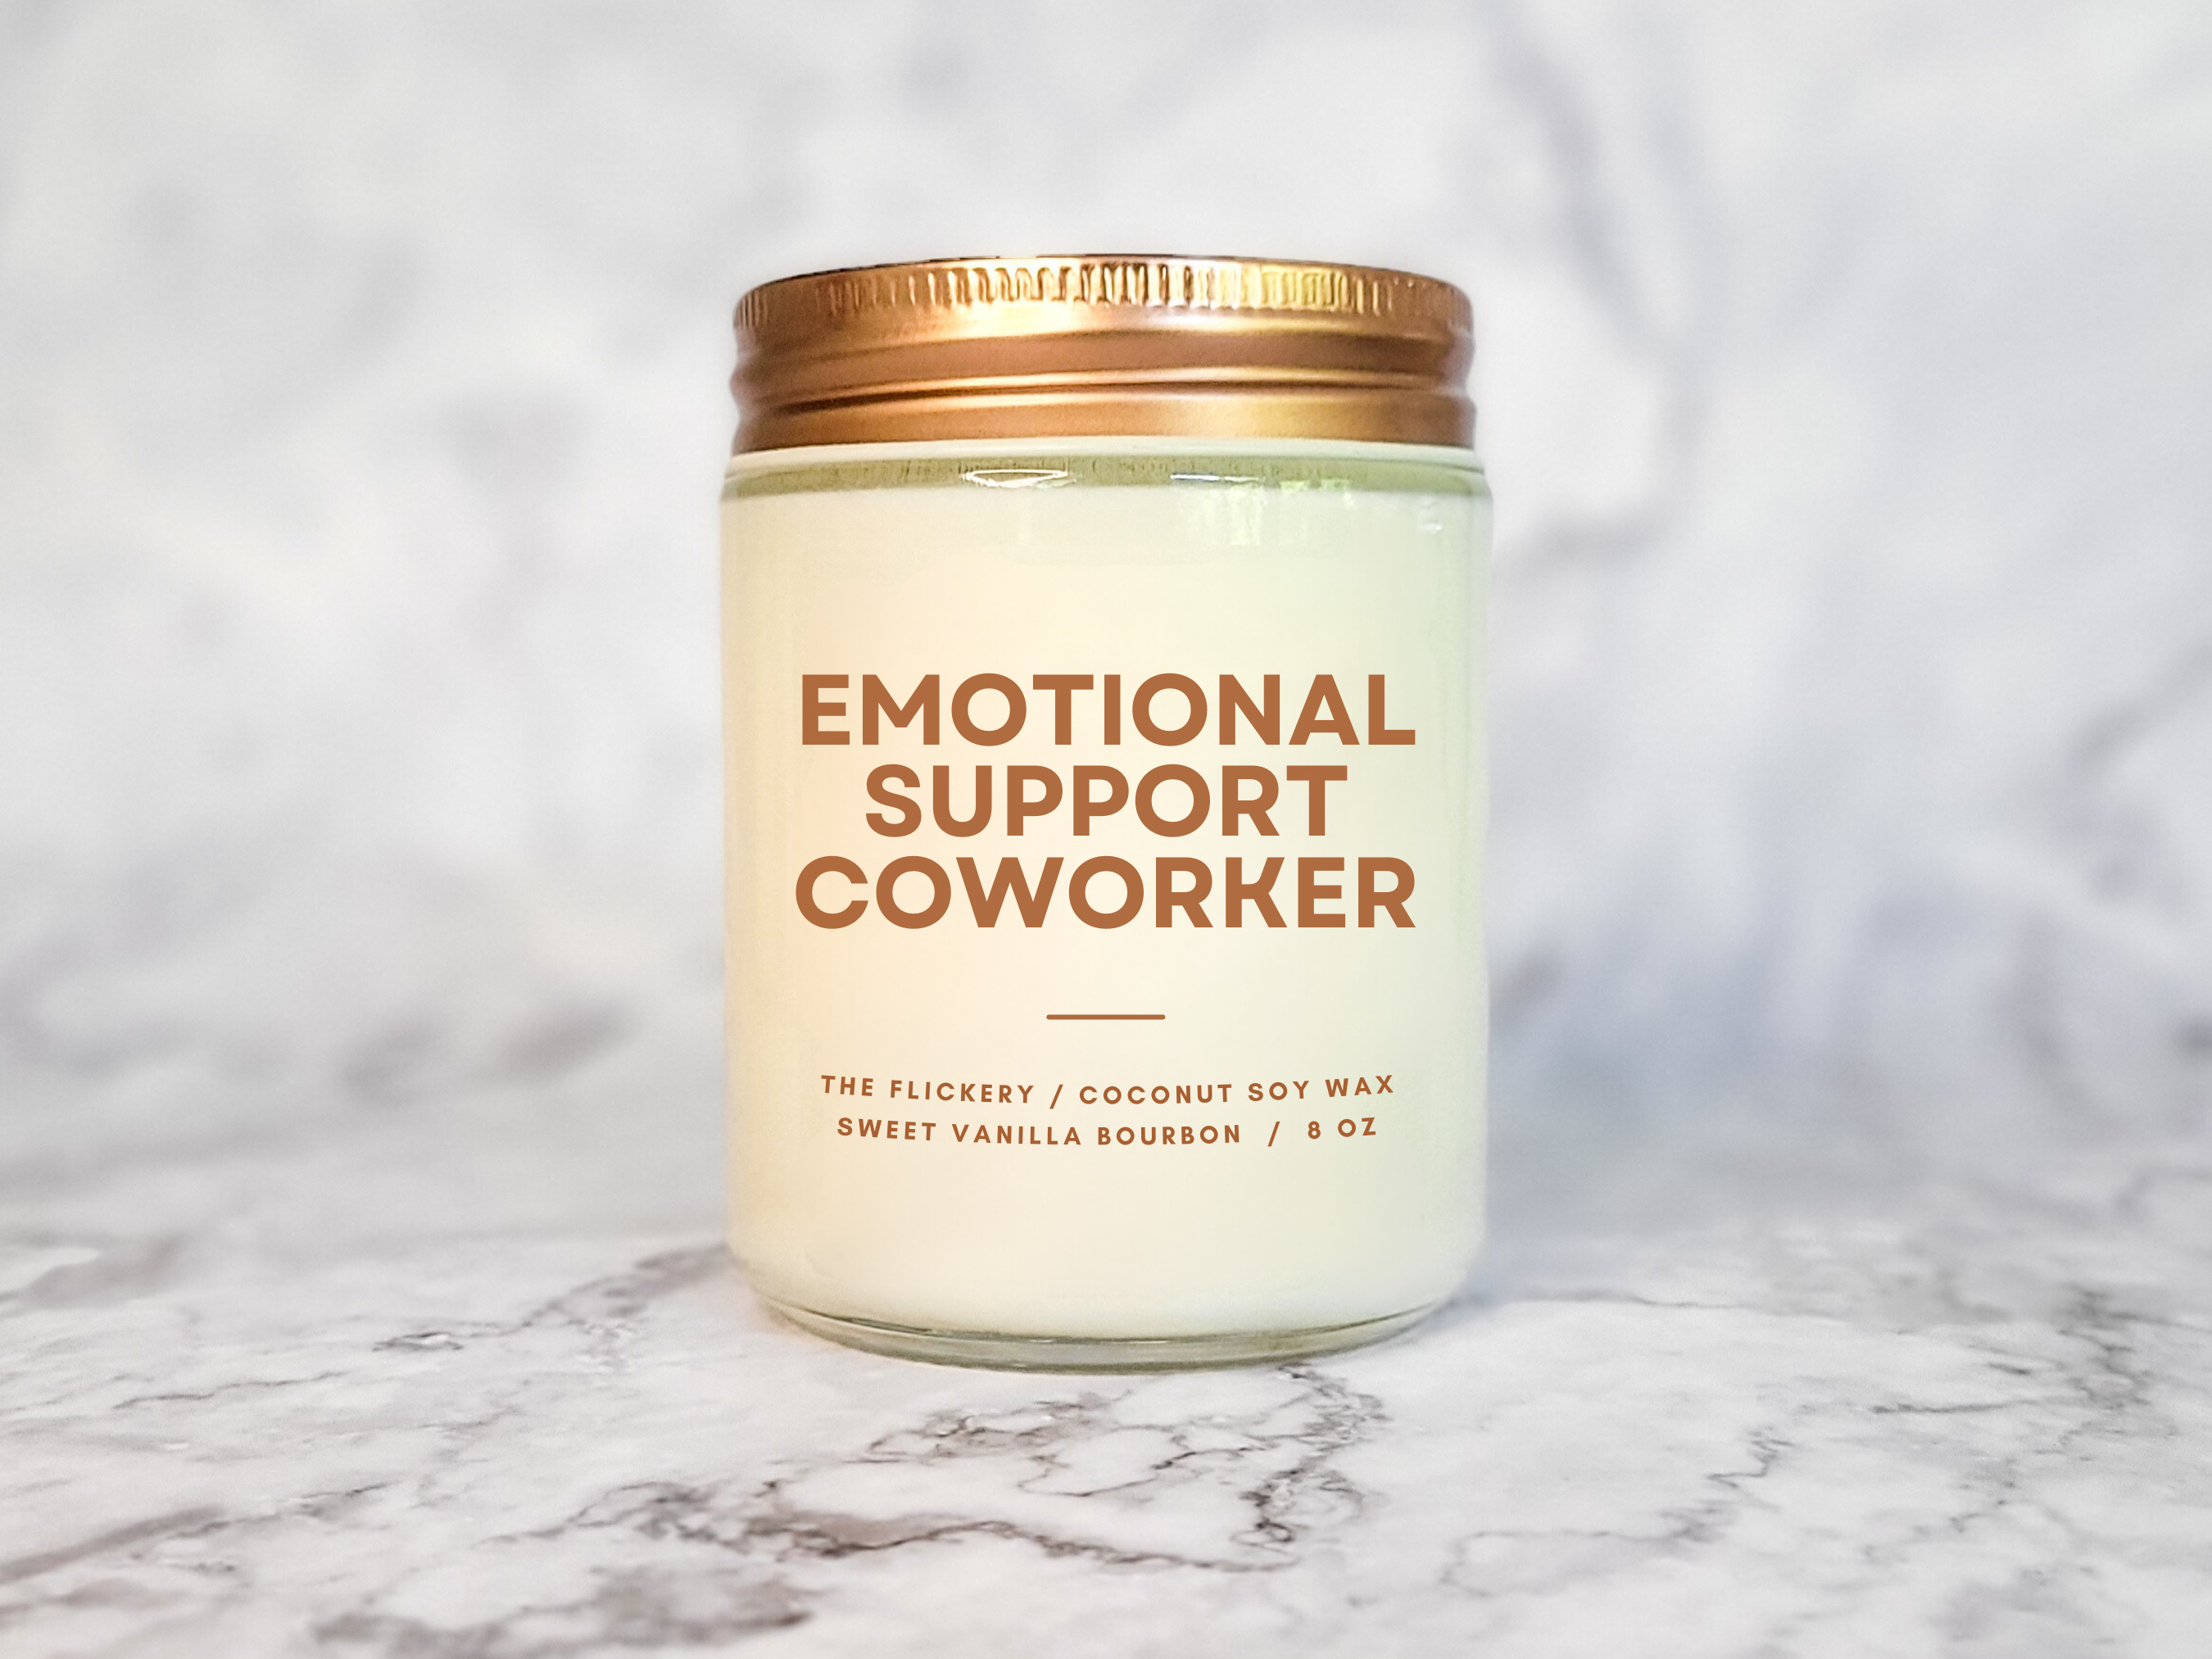 Emotional Support Coworker – The Flickery